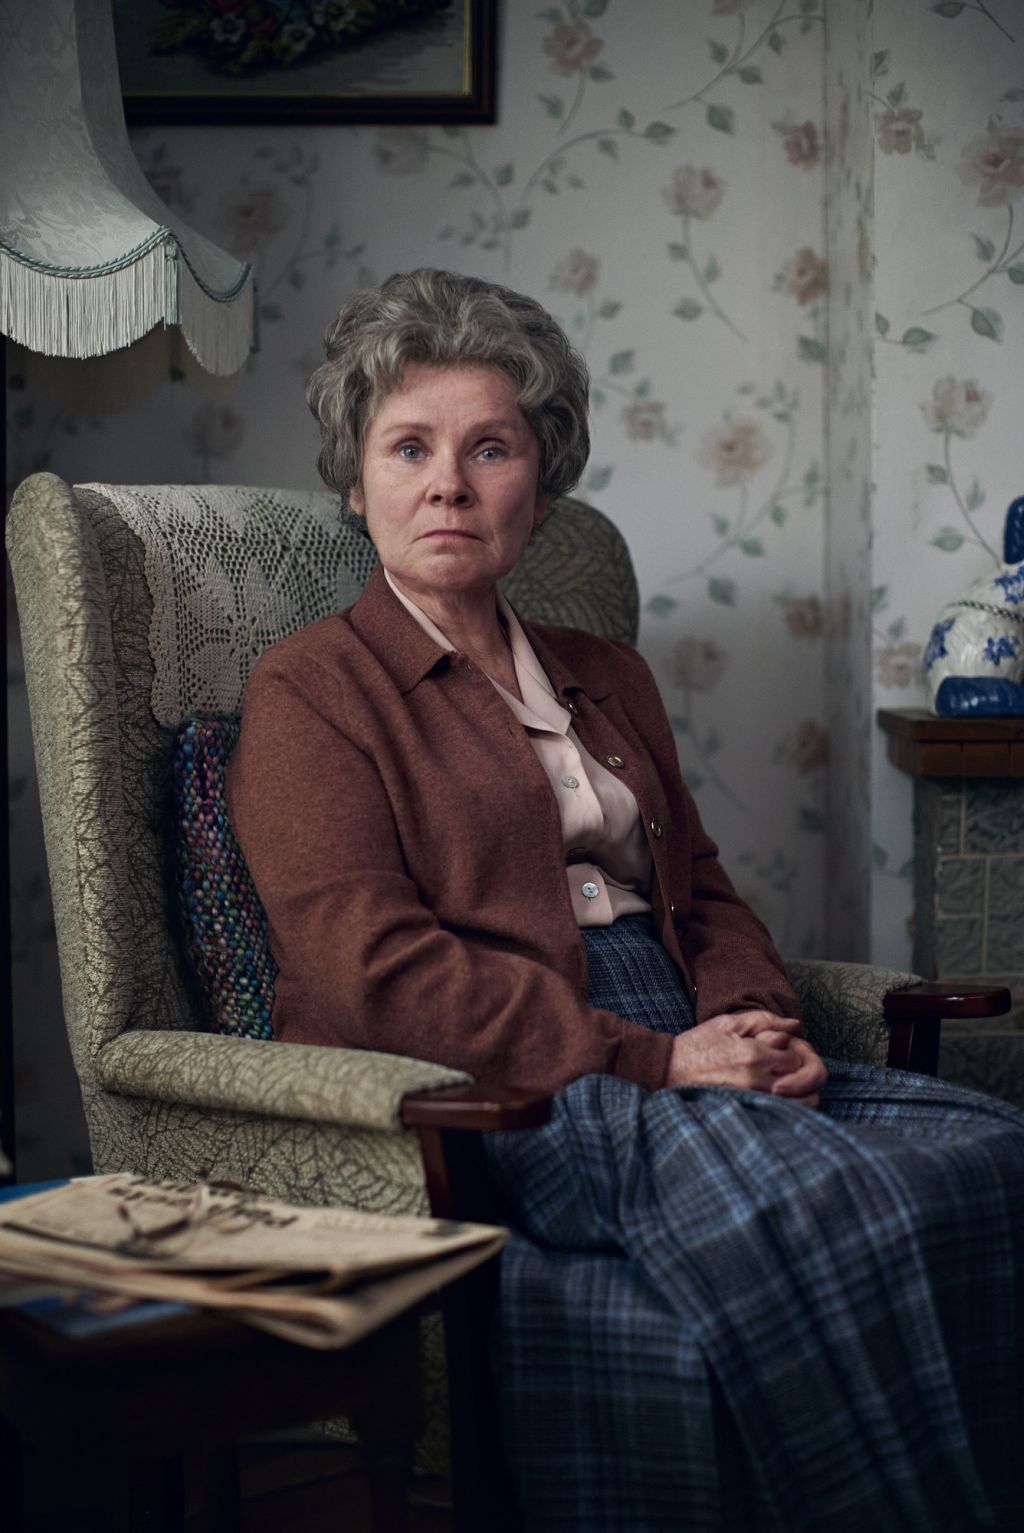 Imelda Staunton as Irene in 'A Lady of Letters'